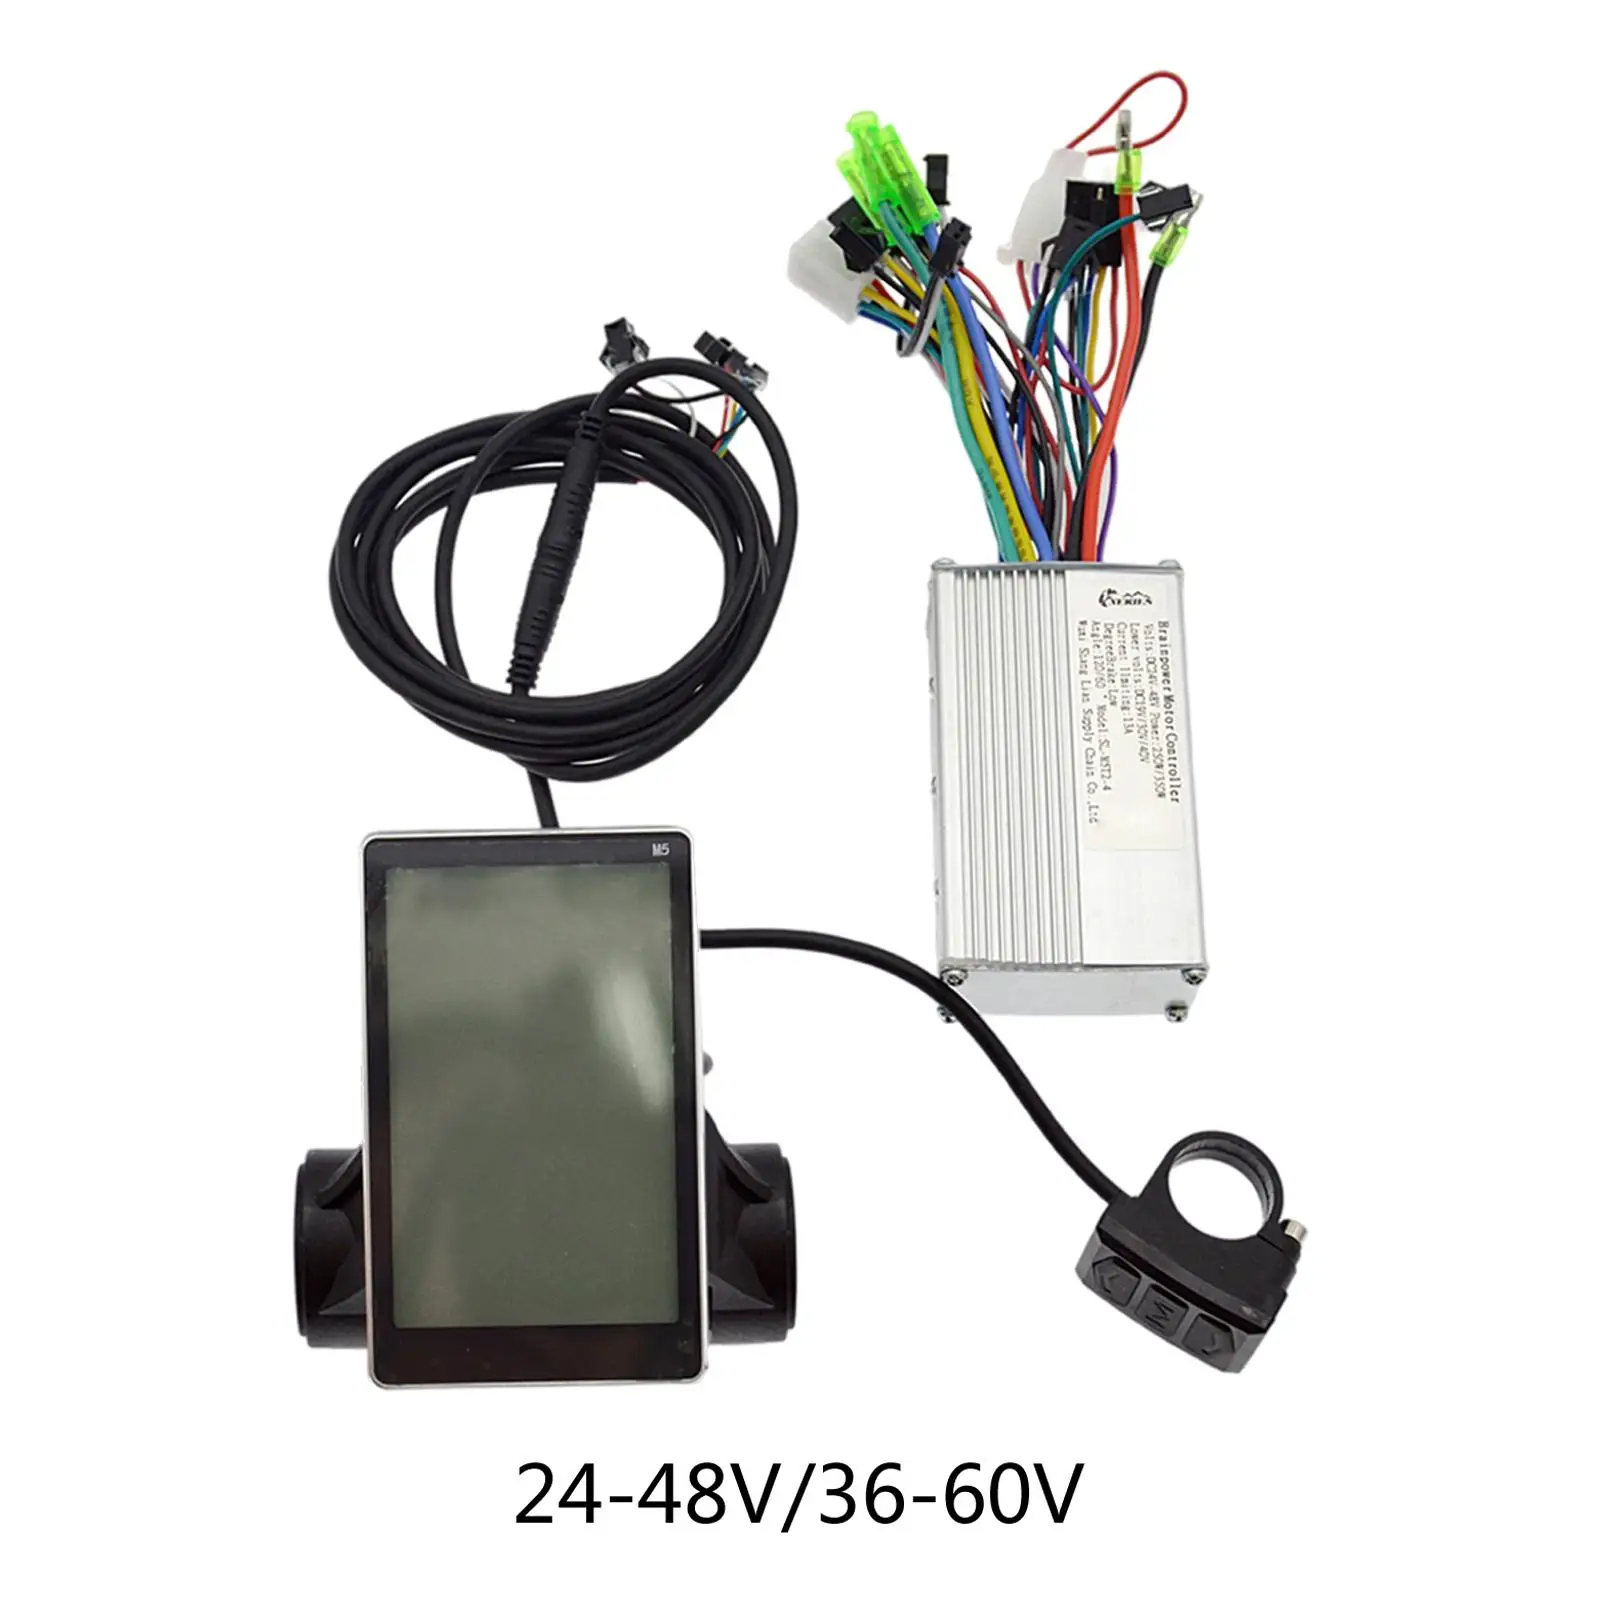 24V-48V 36-60V E-Bike Display Control Panel for Electric Bicycle Controller Conversion Part